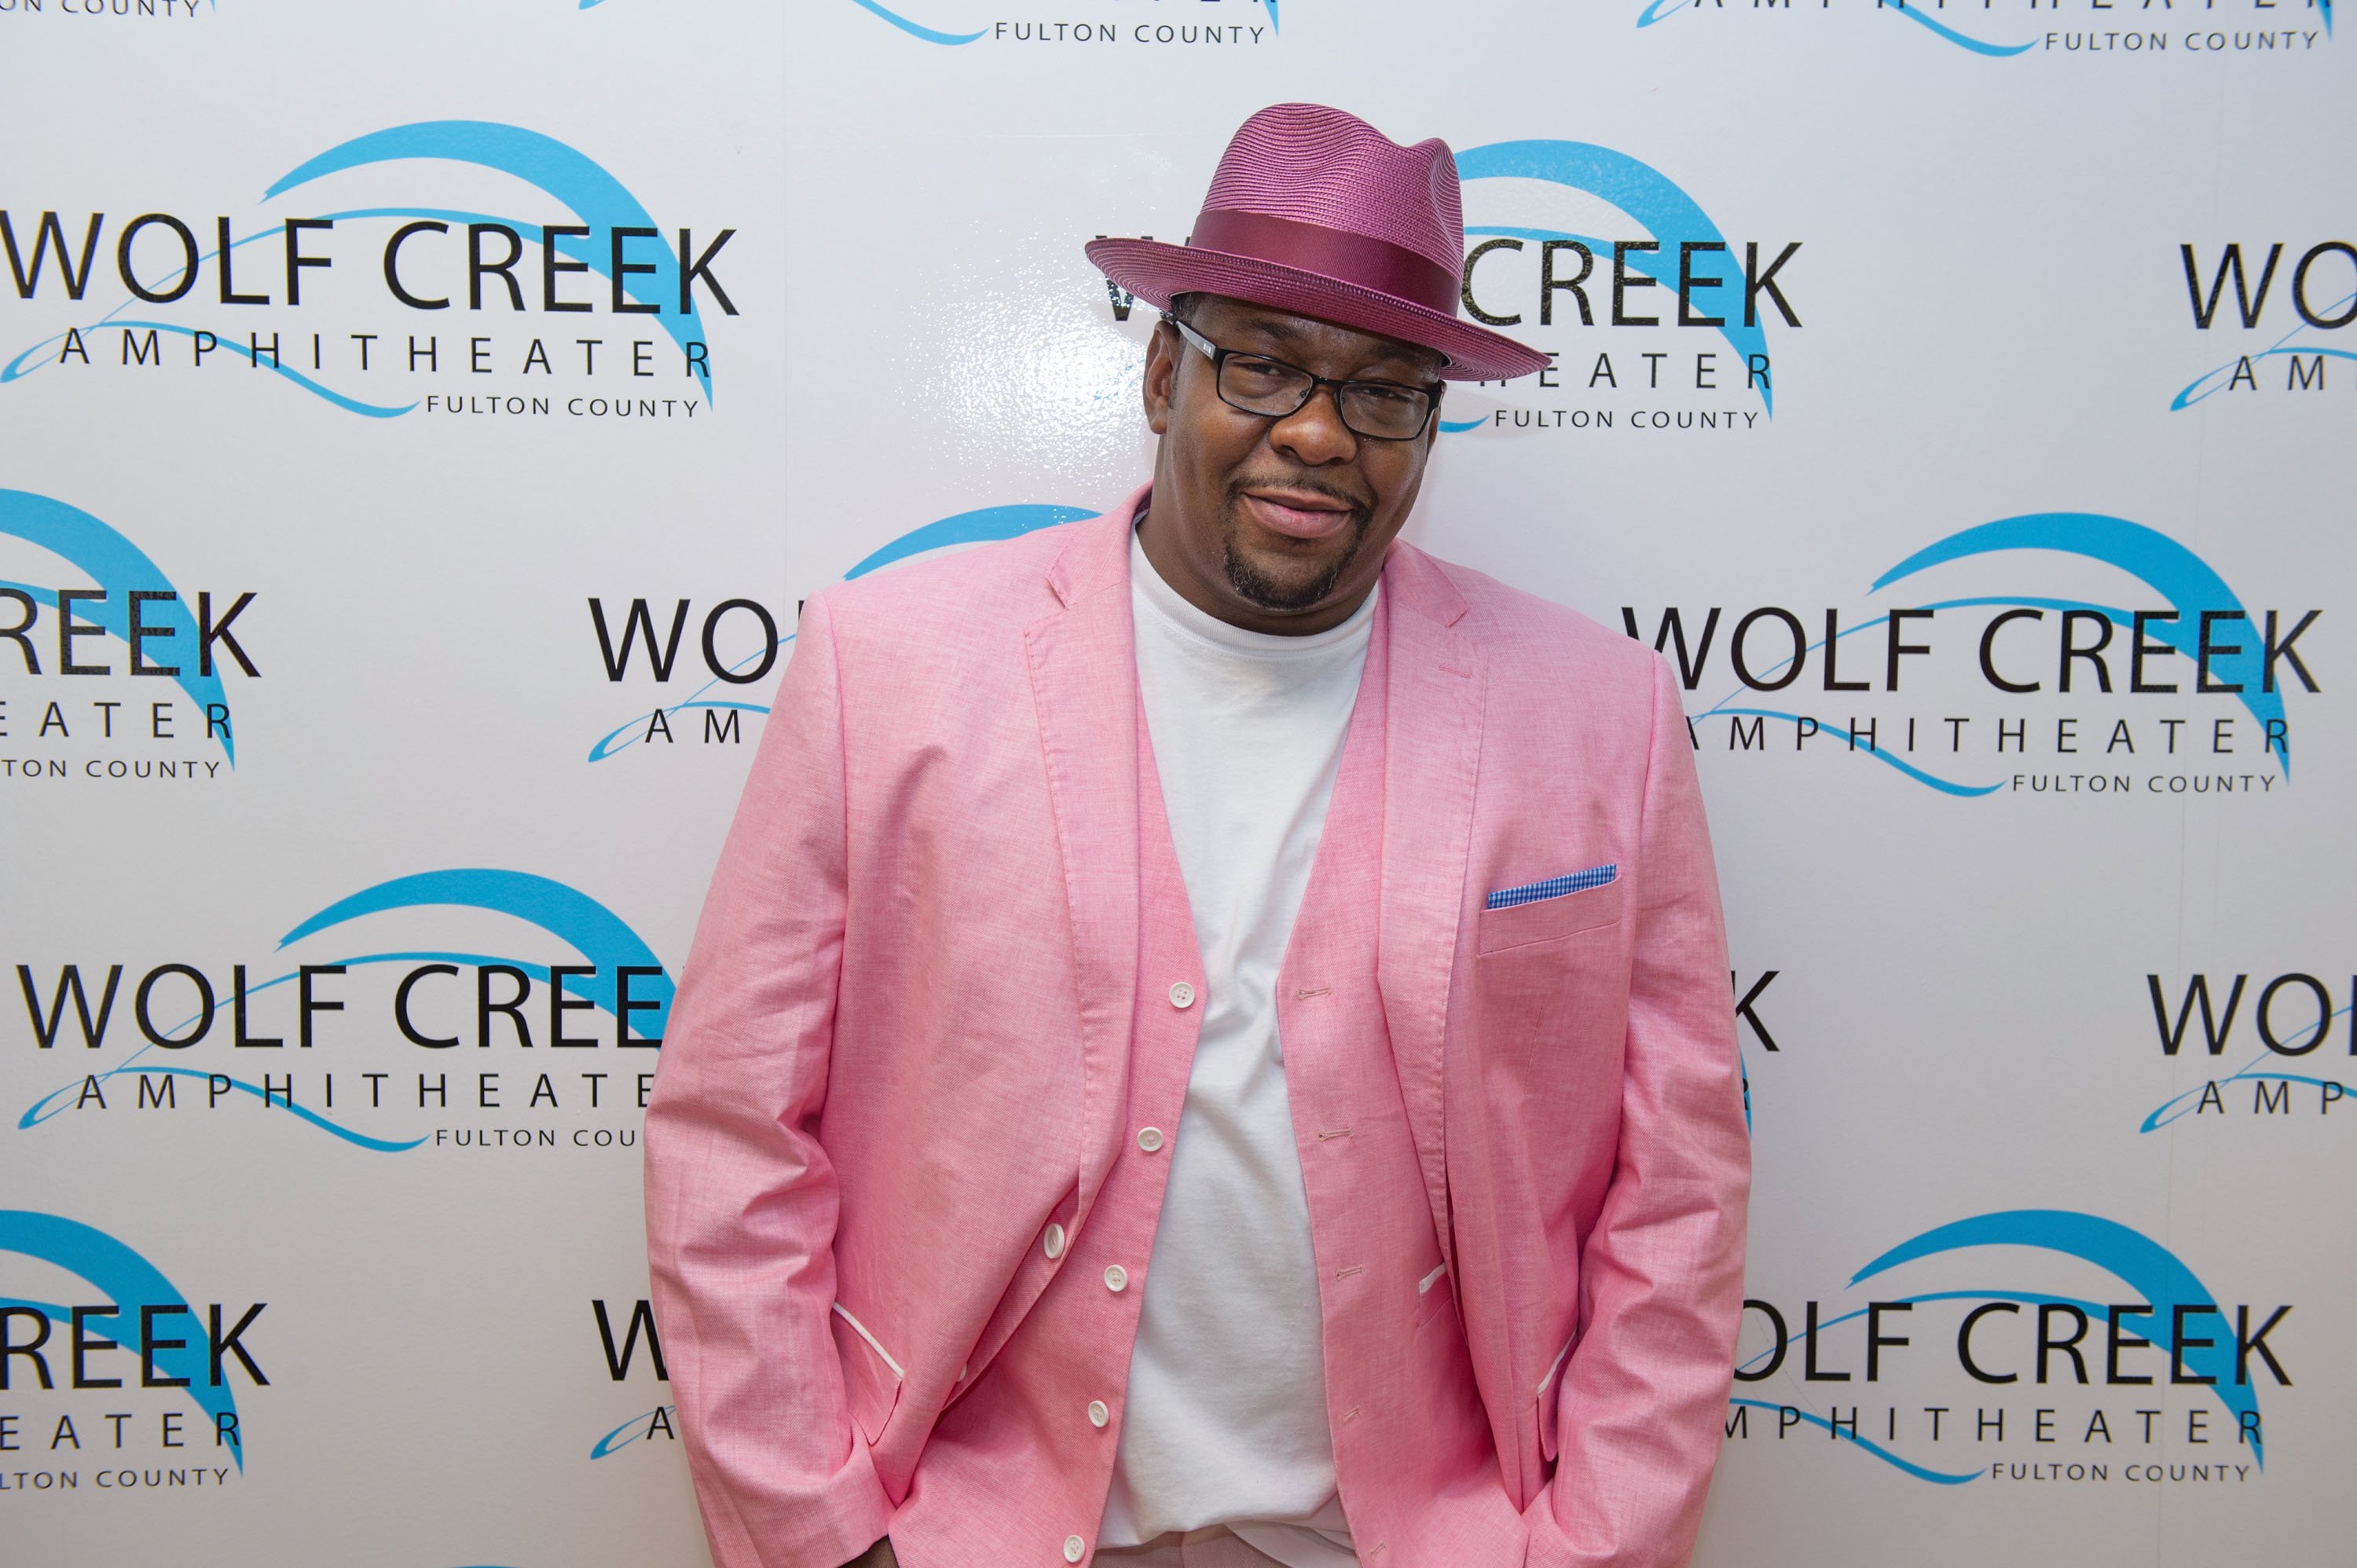 Bobby Brown attends the Affordable Old School Concert Series at Wolf Creek Amphitheater on July 4, 2015 in Atlanta, Georgia | Photo: Getty Images